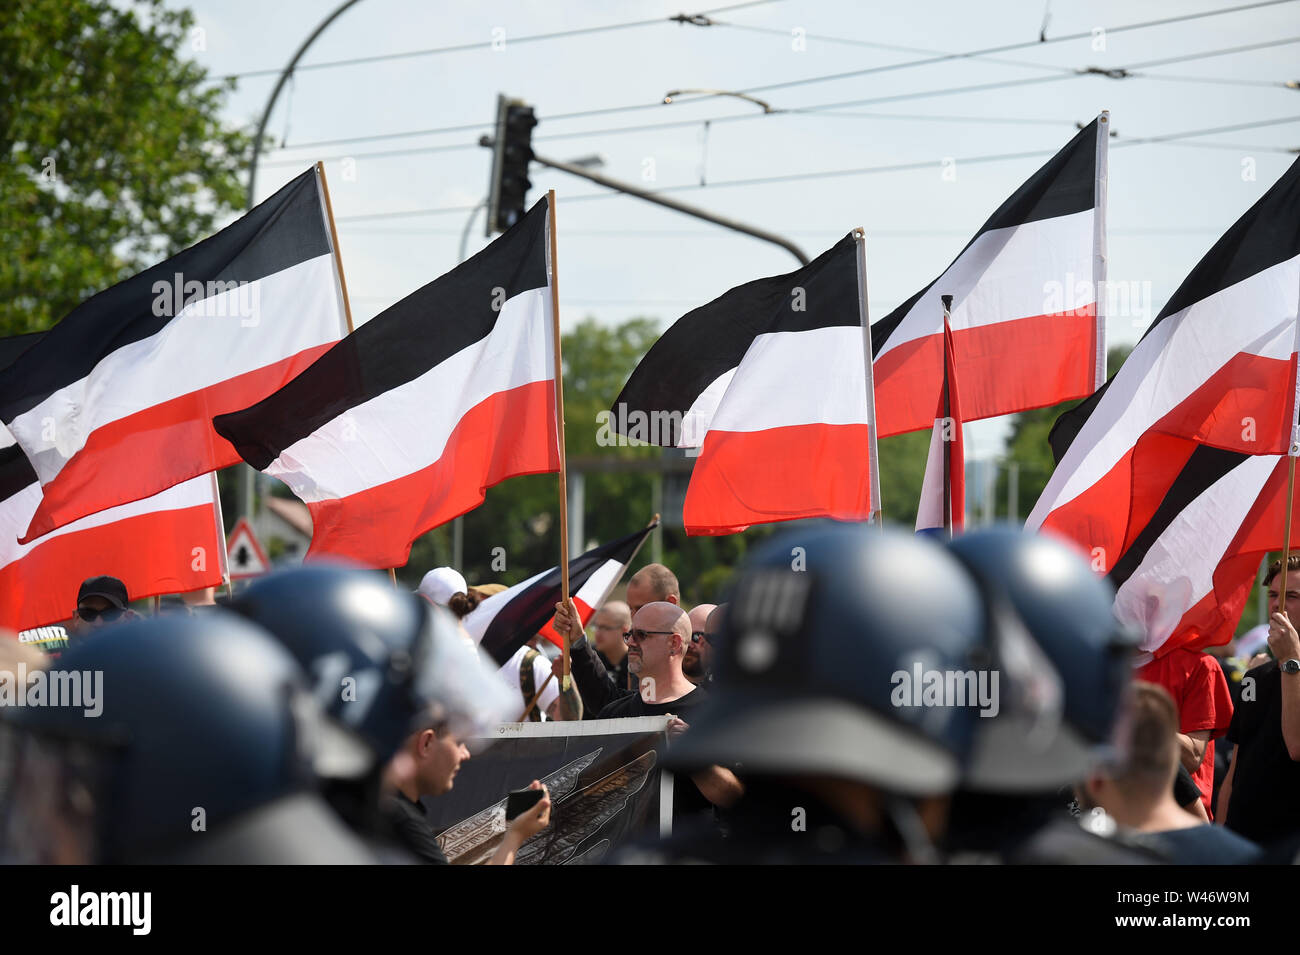 Hanover, Germany. Kassel, Germany. 20th July, 2019. Supporters of the small right-wing extremist party 'Die Rechte' (The Right) are flying their flags during the demonstration. The party had called for a demonstration in Kassel against media prejudgement in connection with the Lübcke case. A massive police presence is to prevent possible riots between the two camps. Credit: Uwe Zucchi/dpa/Alamy Live News Stock Photo